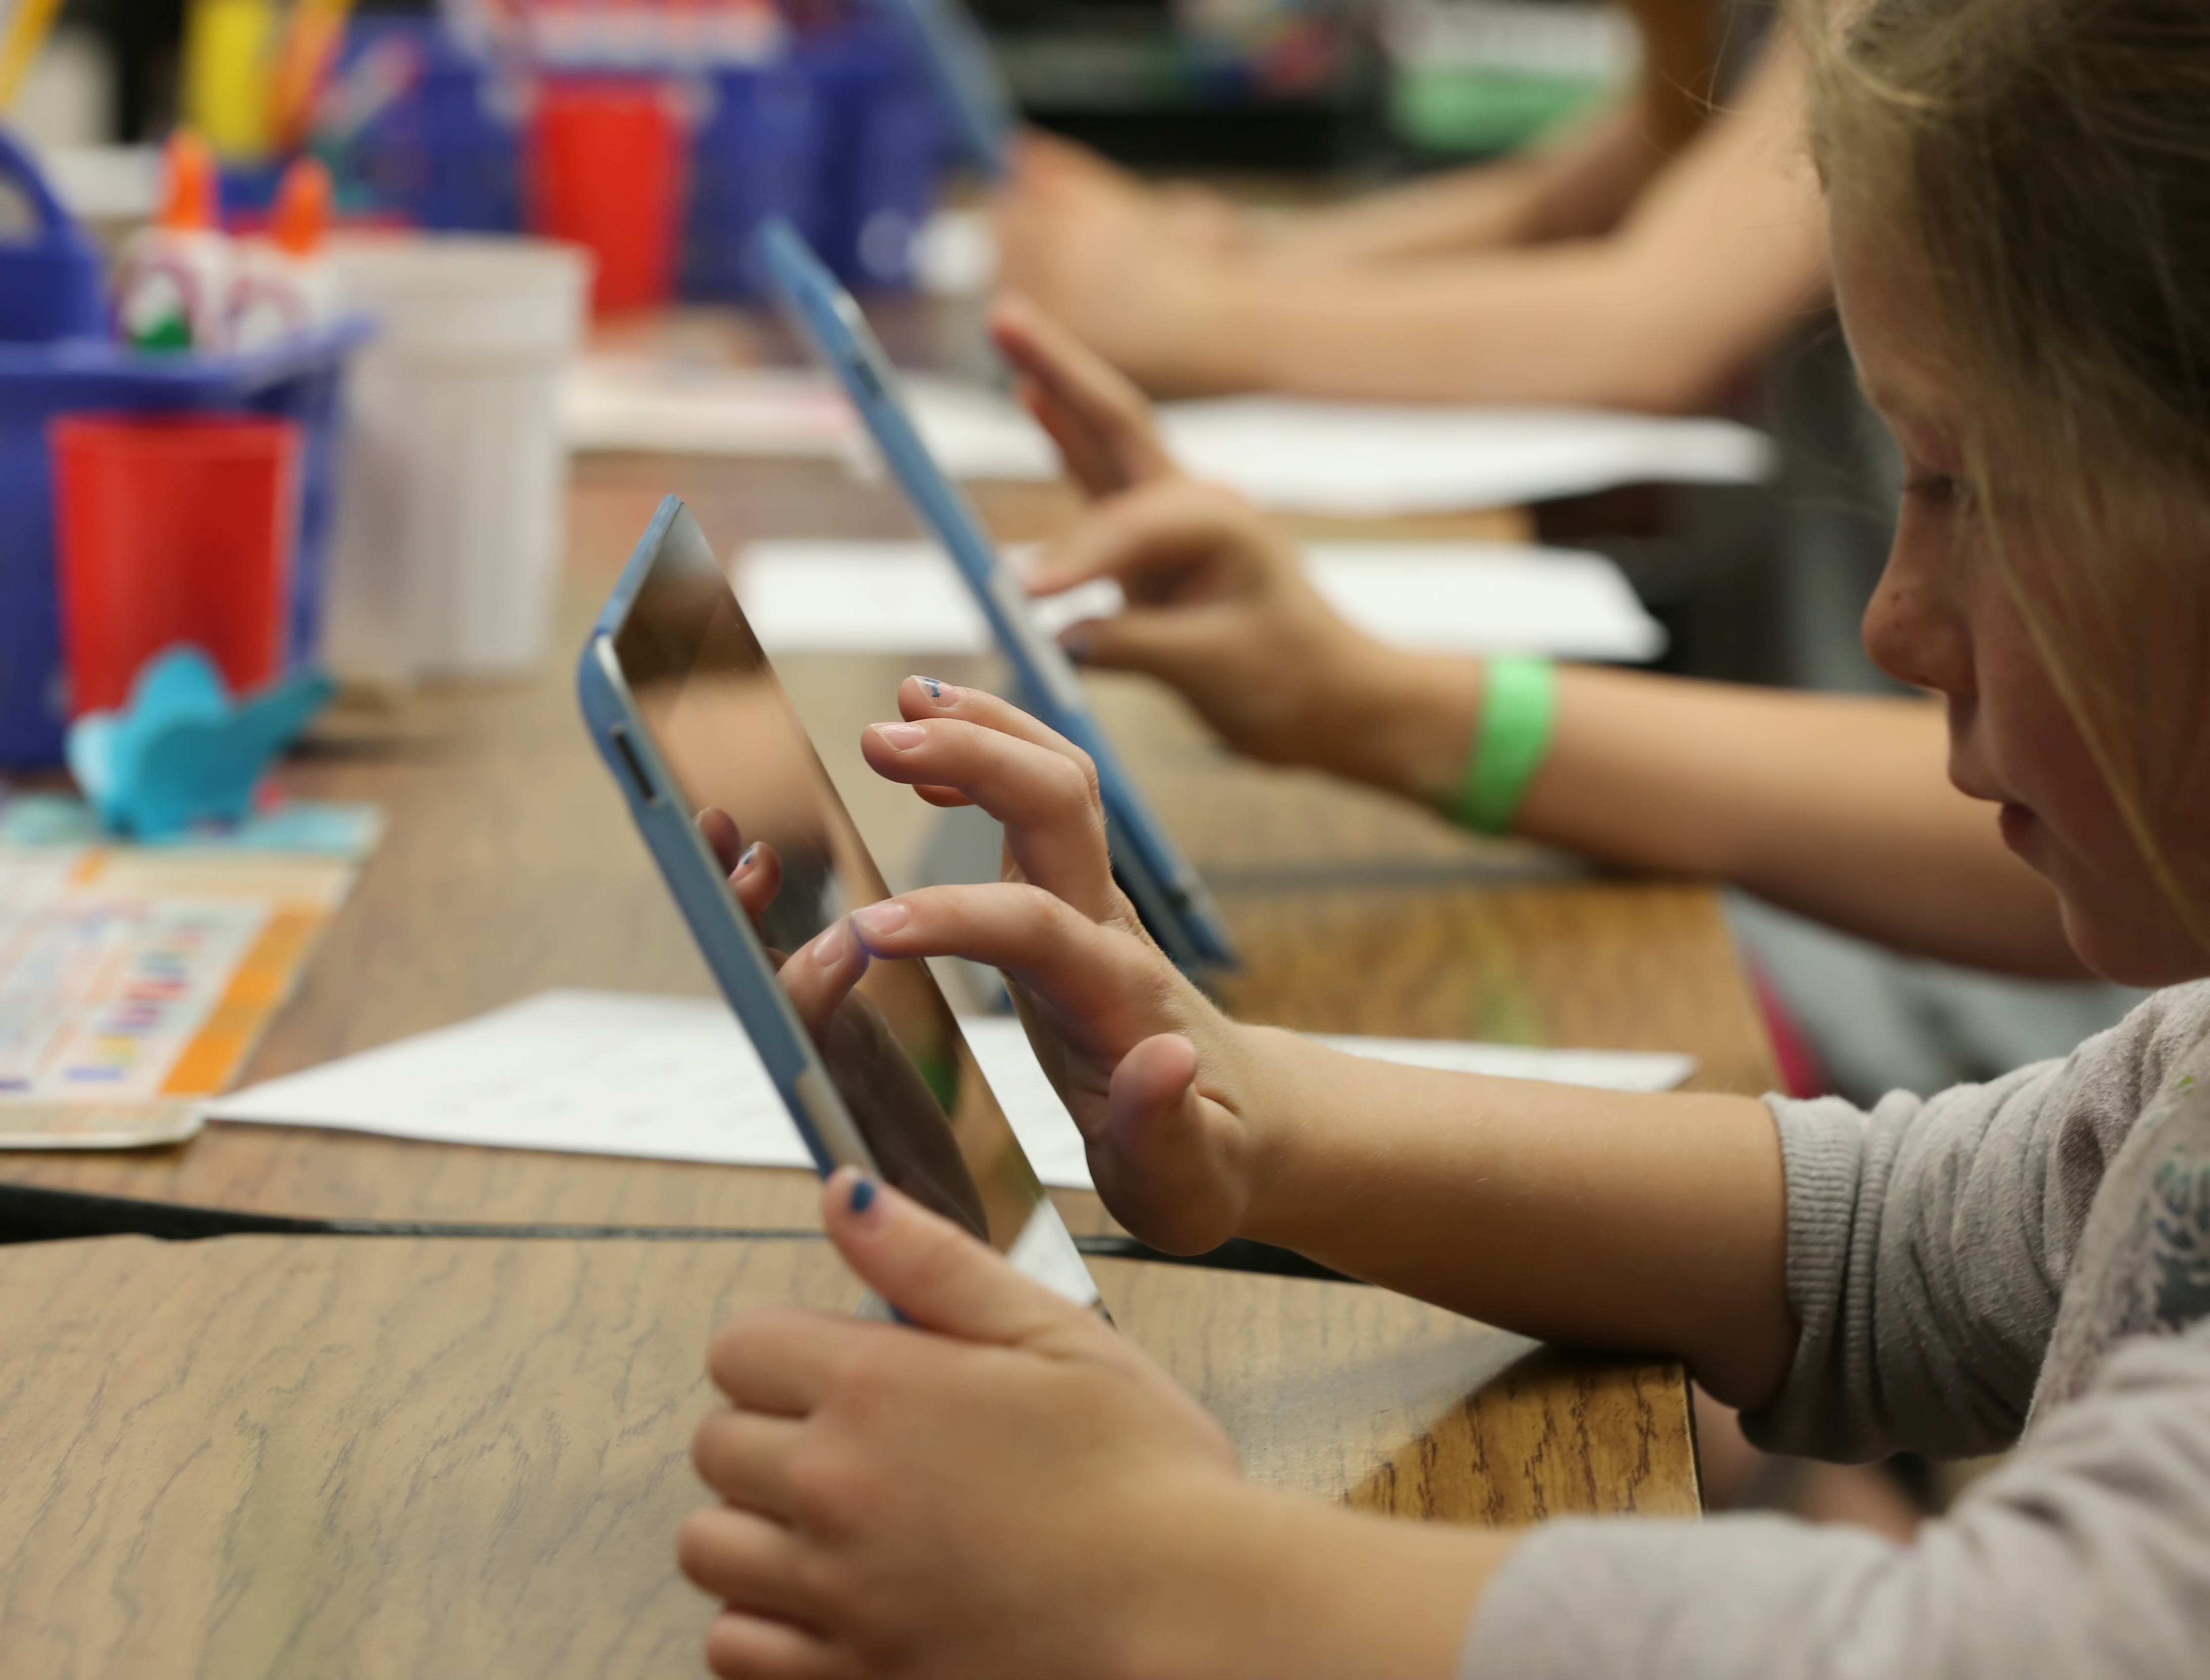 Second graders work on Apple Inc. iPads as part of their classroom work at Park Lane Elementary school, in the Canyons School District, in Sandy, Utah, U.S. on Monday, May 20, 2013. (Bloomberg&mdash;Bloomberg via Getty Images)